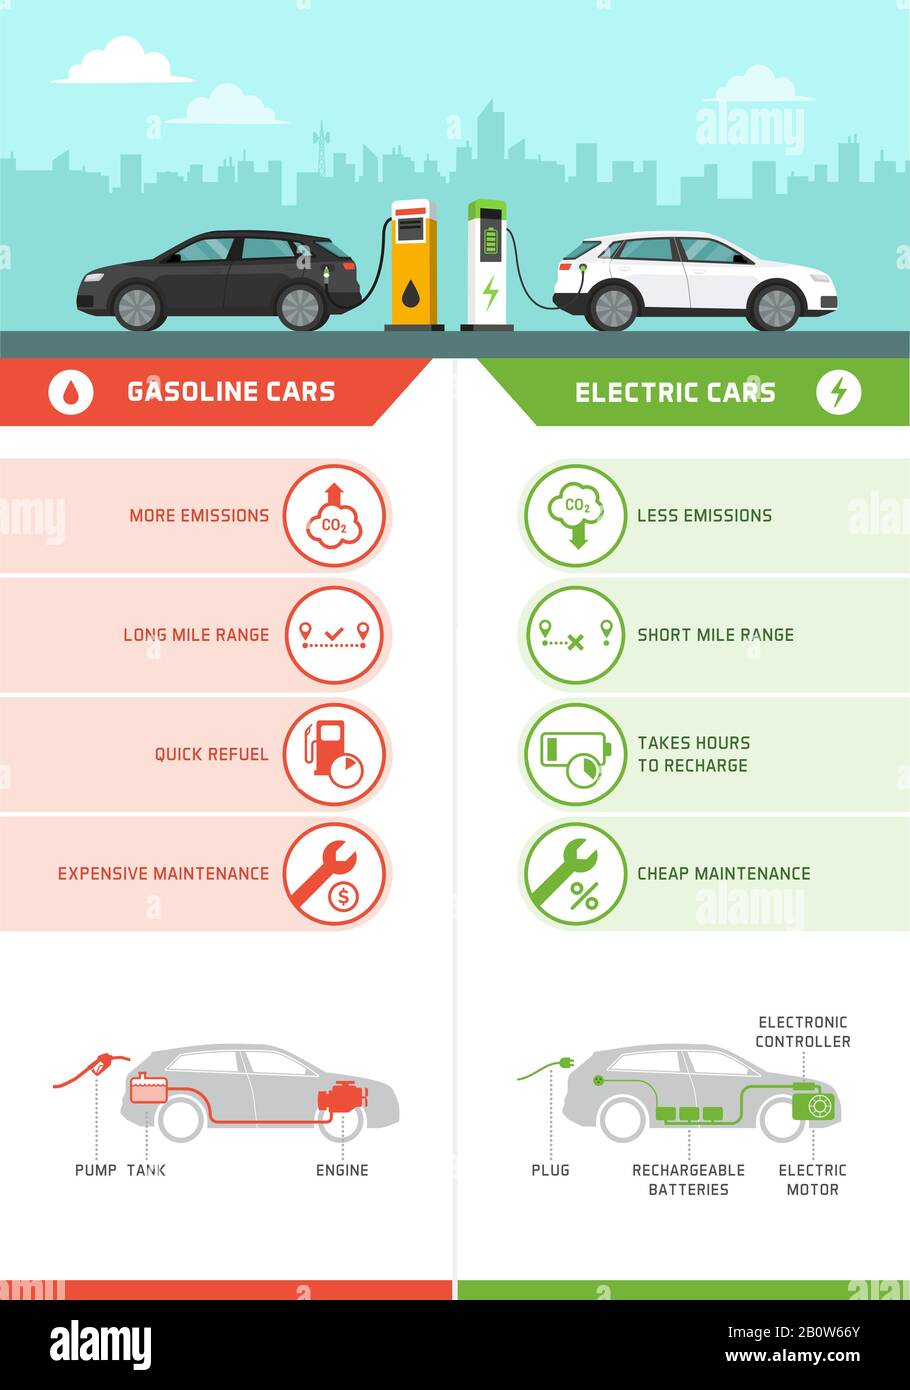 Gasoline cars and electric cars comparison infographic with icons, cars refueling and charging at the station and car parts diagram, automotive techno Stock Vector